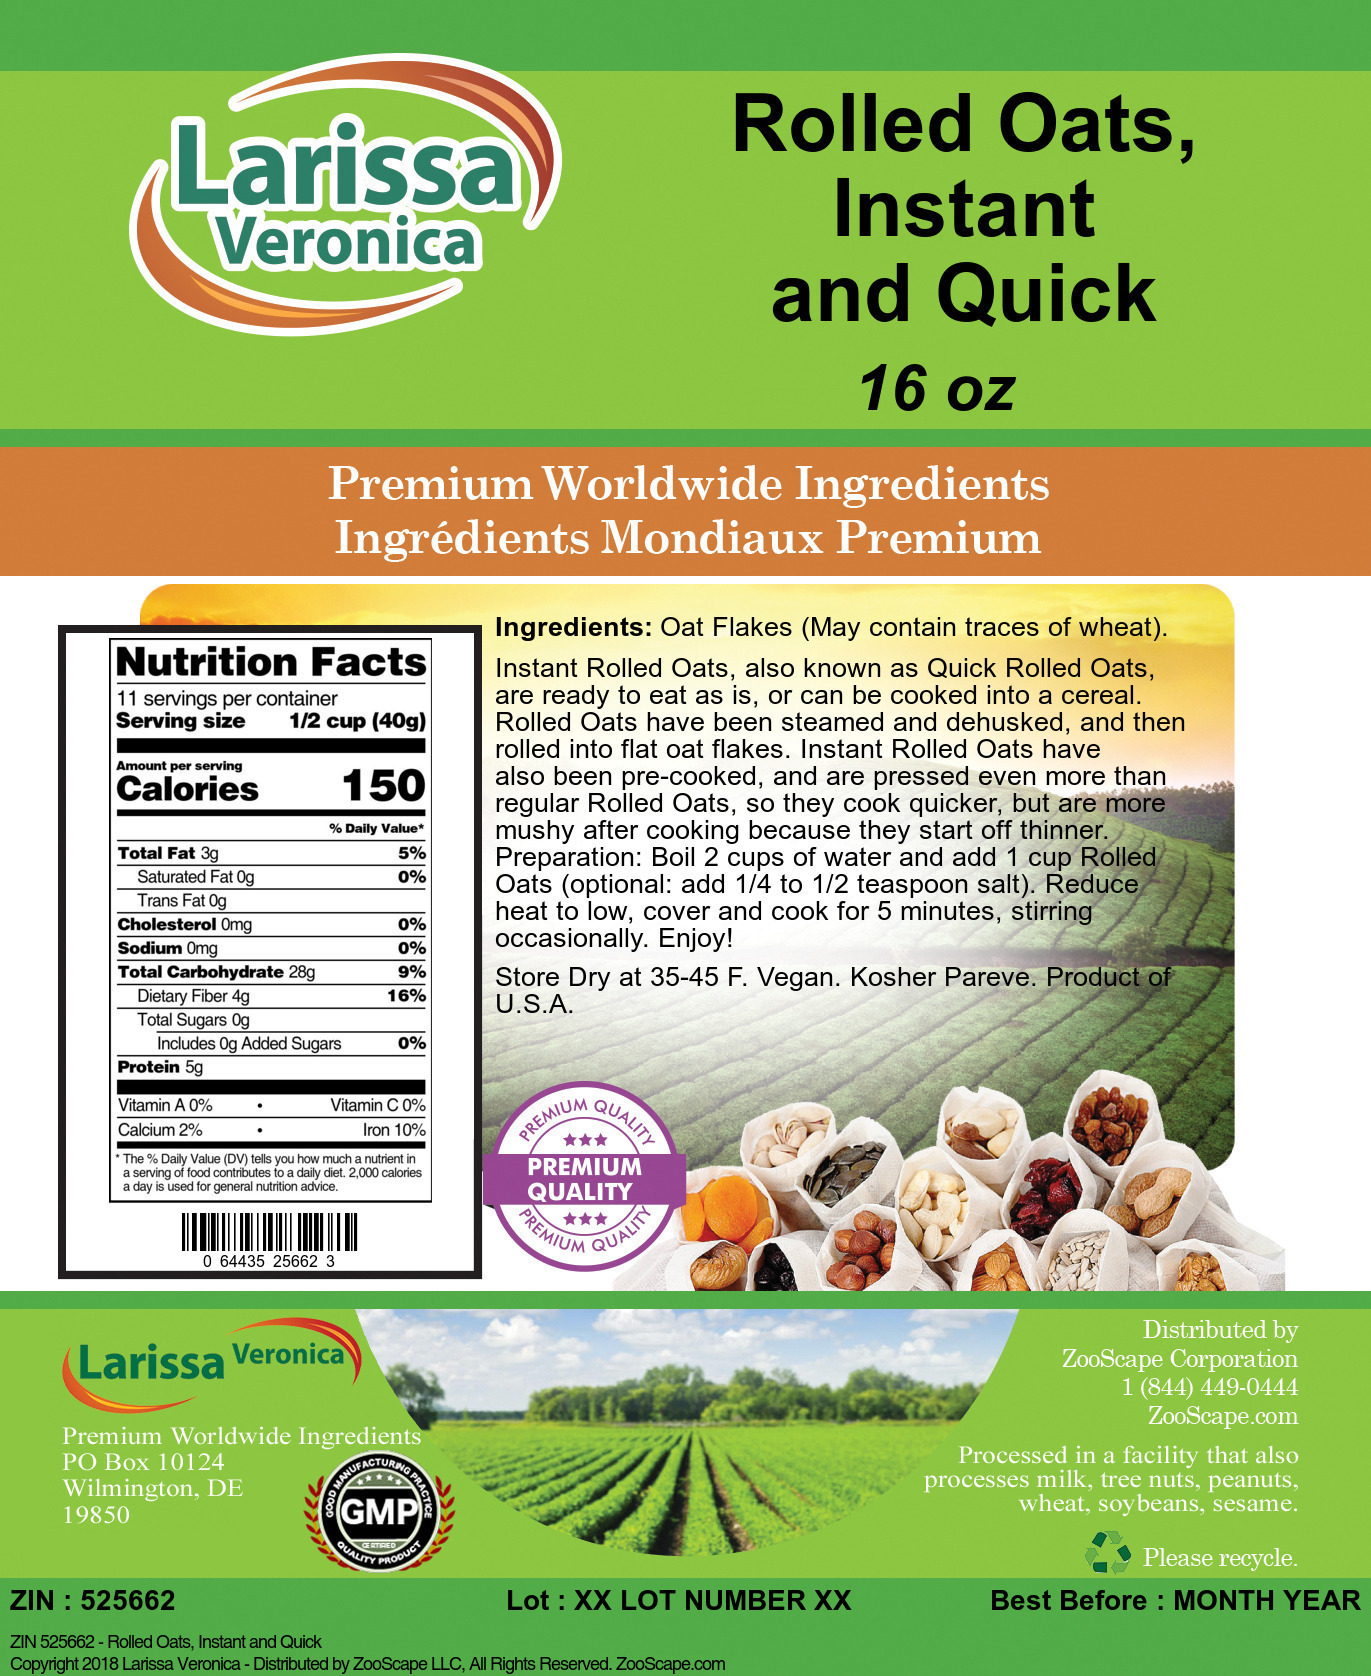 Rolled Oats, Instant and Quick - Label